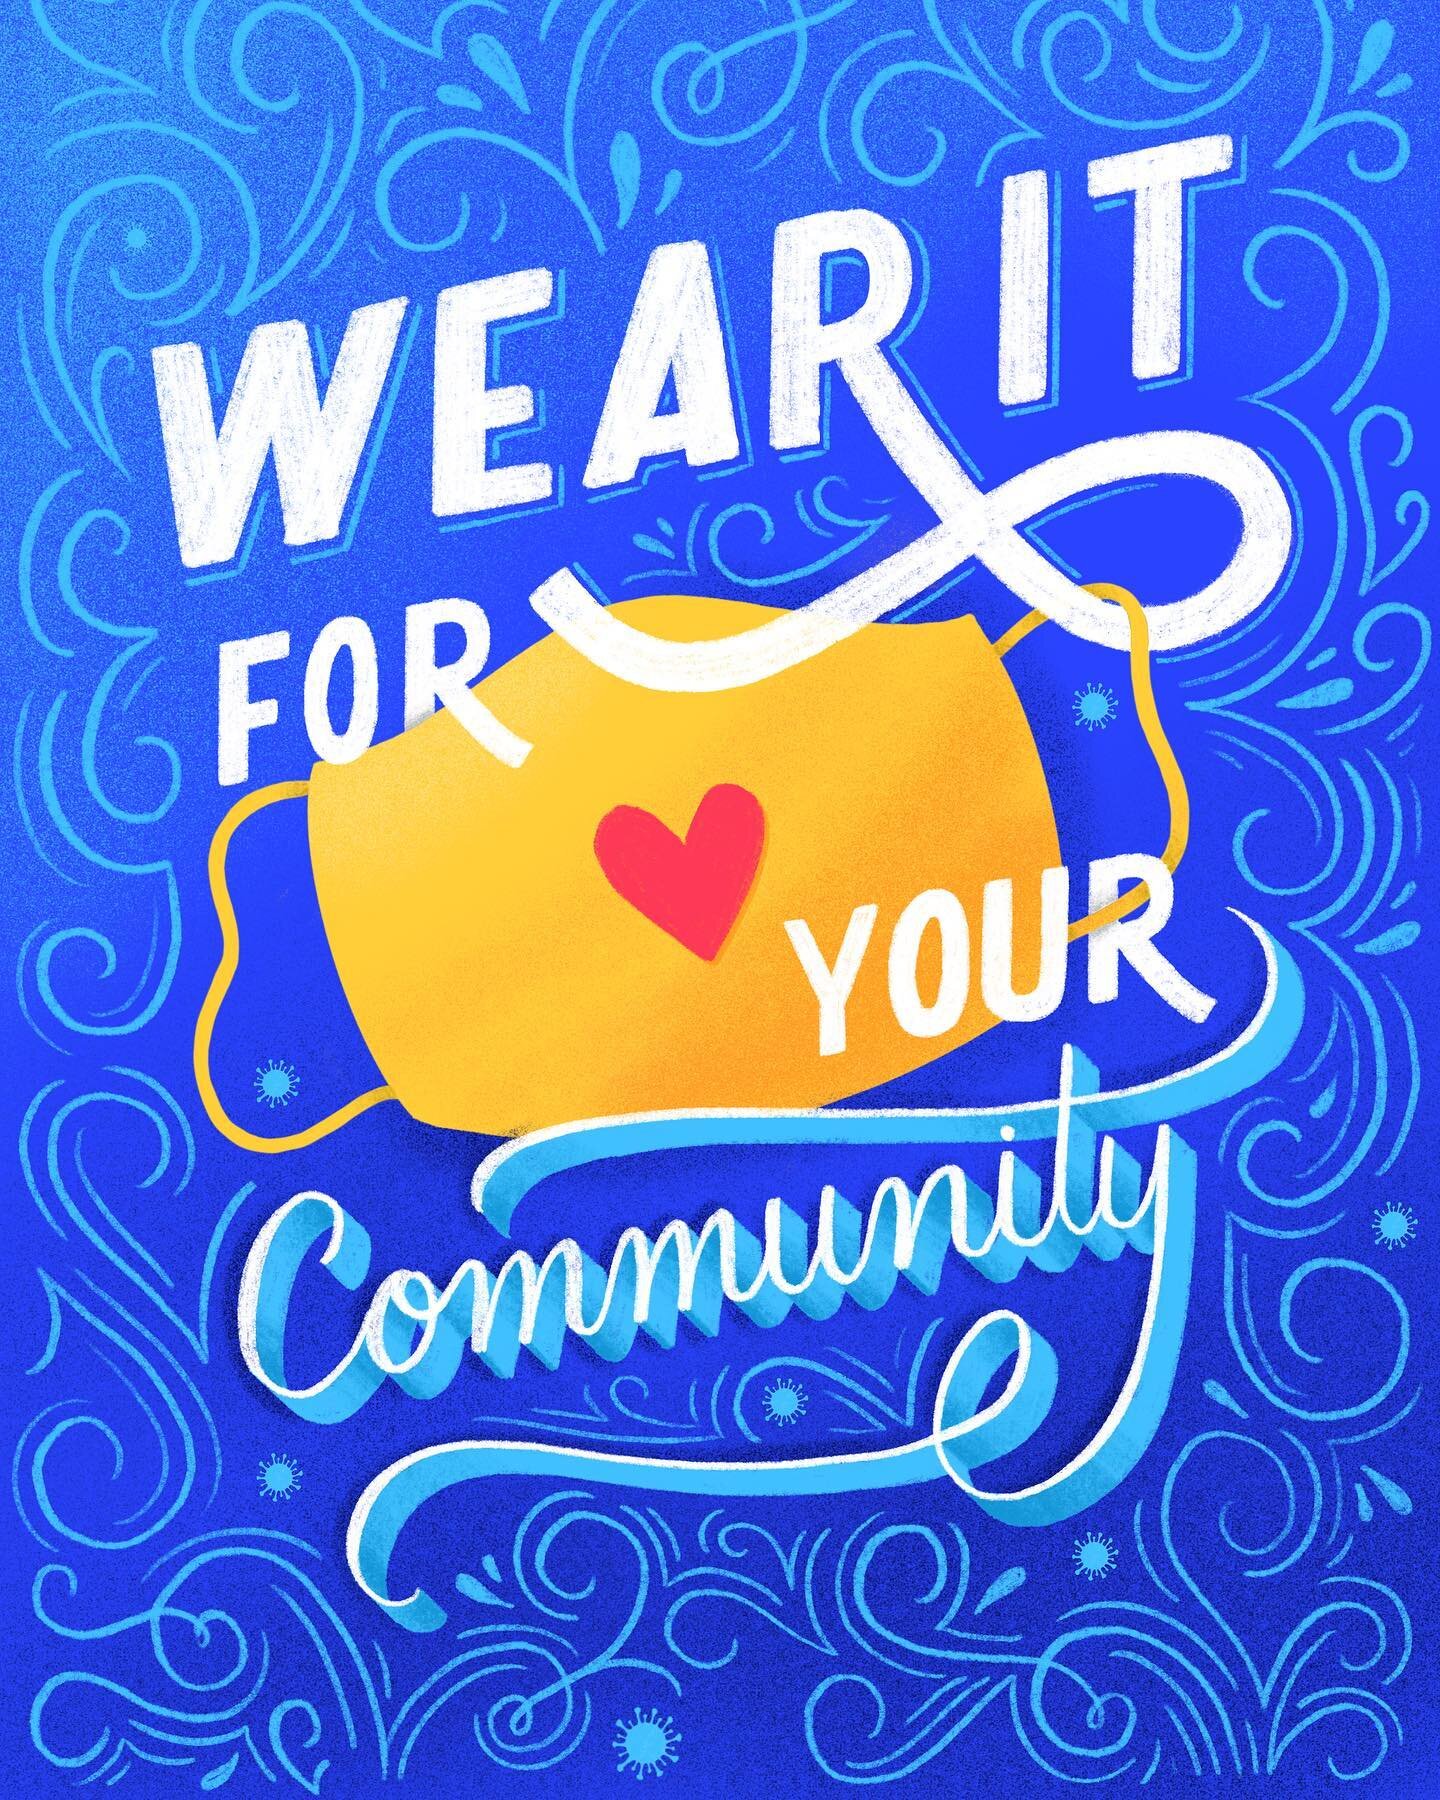 Wear your mask‼️😷 For your community, for your family, and for yourself 

[...]
.
.
.
.
#handlettering #lettering #type #handtype #goodtype #designspiration #graphicdesign #typematters #dailytype #design #designspiration #handdrawntype #designeveryd